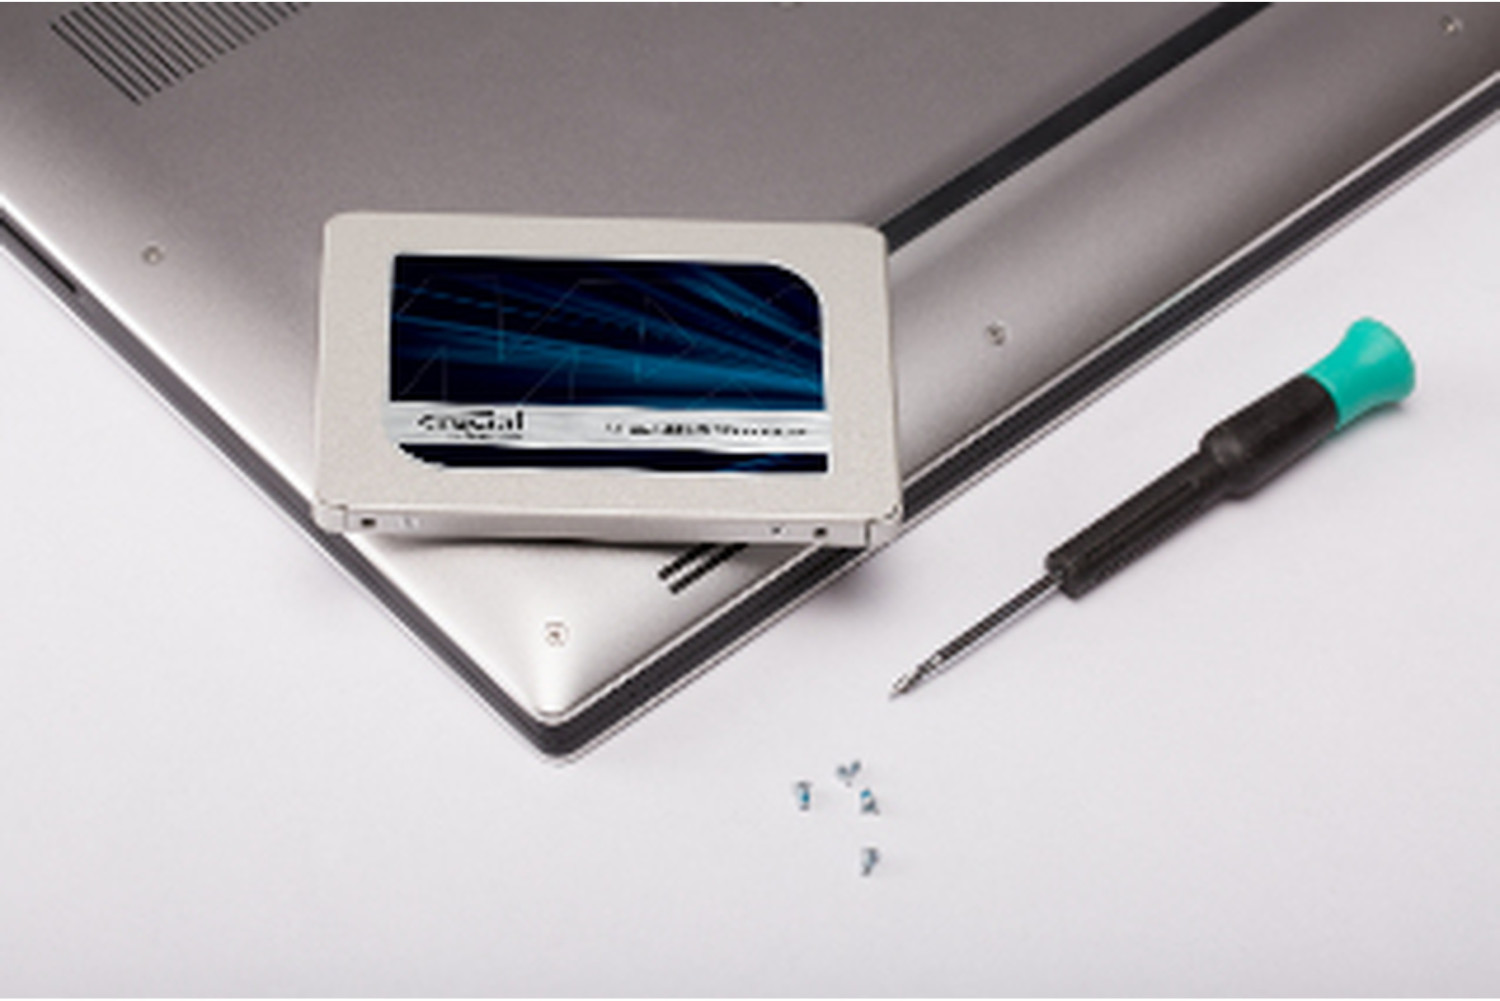 Crucial MX500 1To 2.5 7mm SSD Interne (CT1000MX500SSD1) neuf sellé